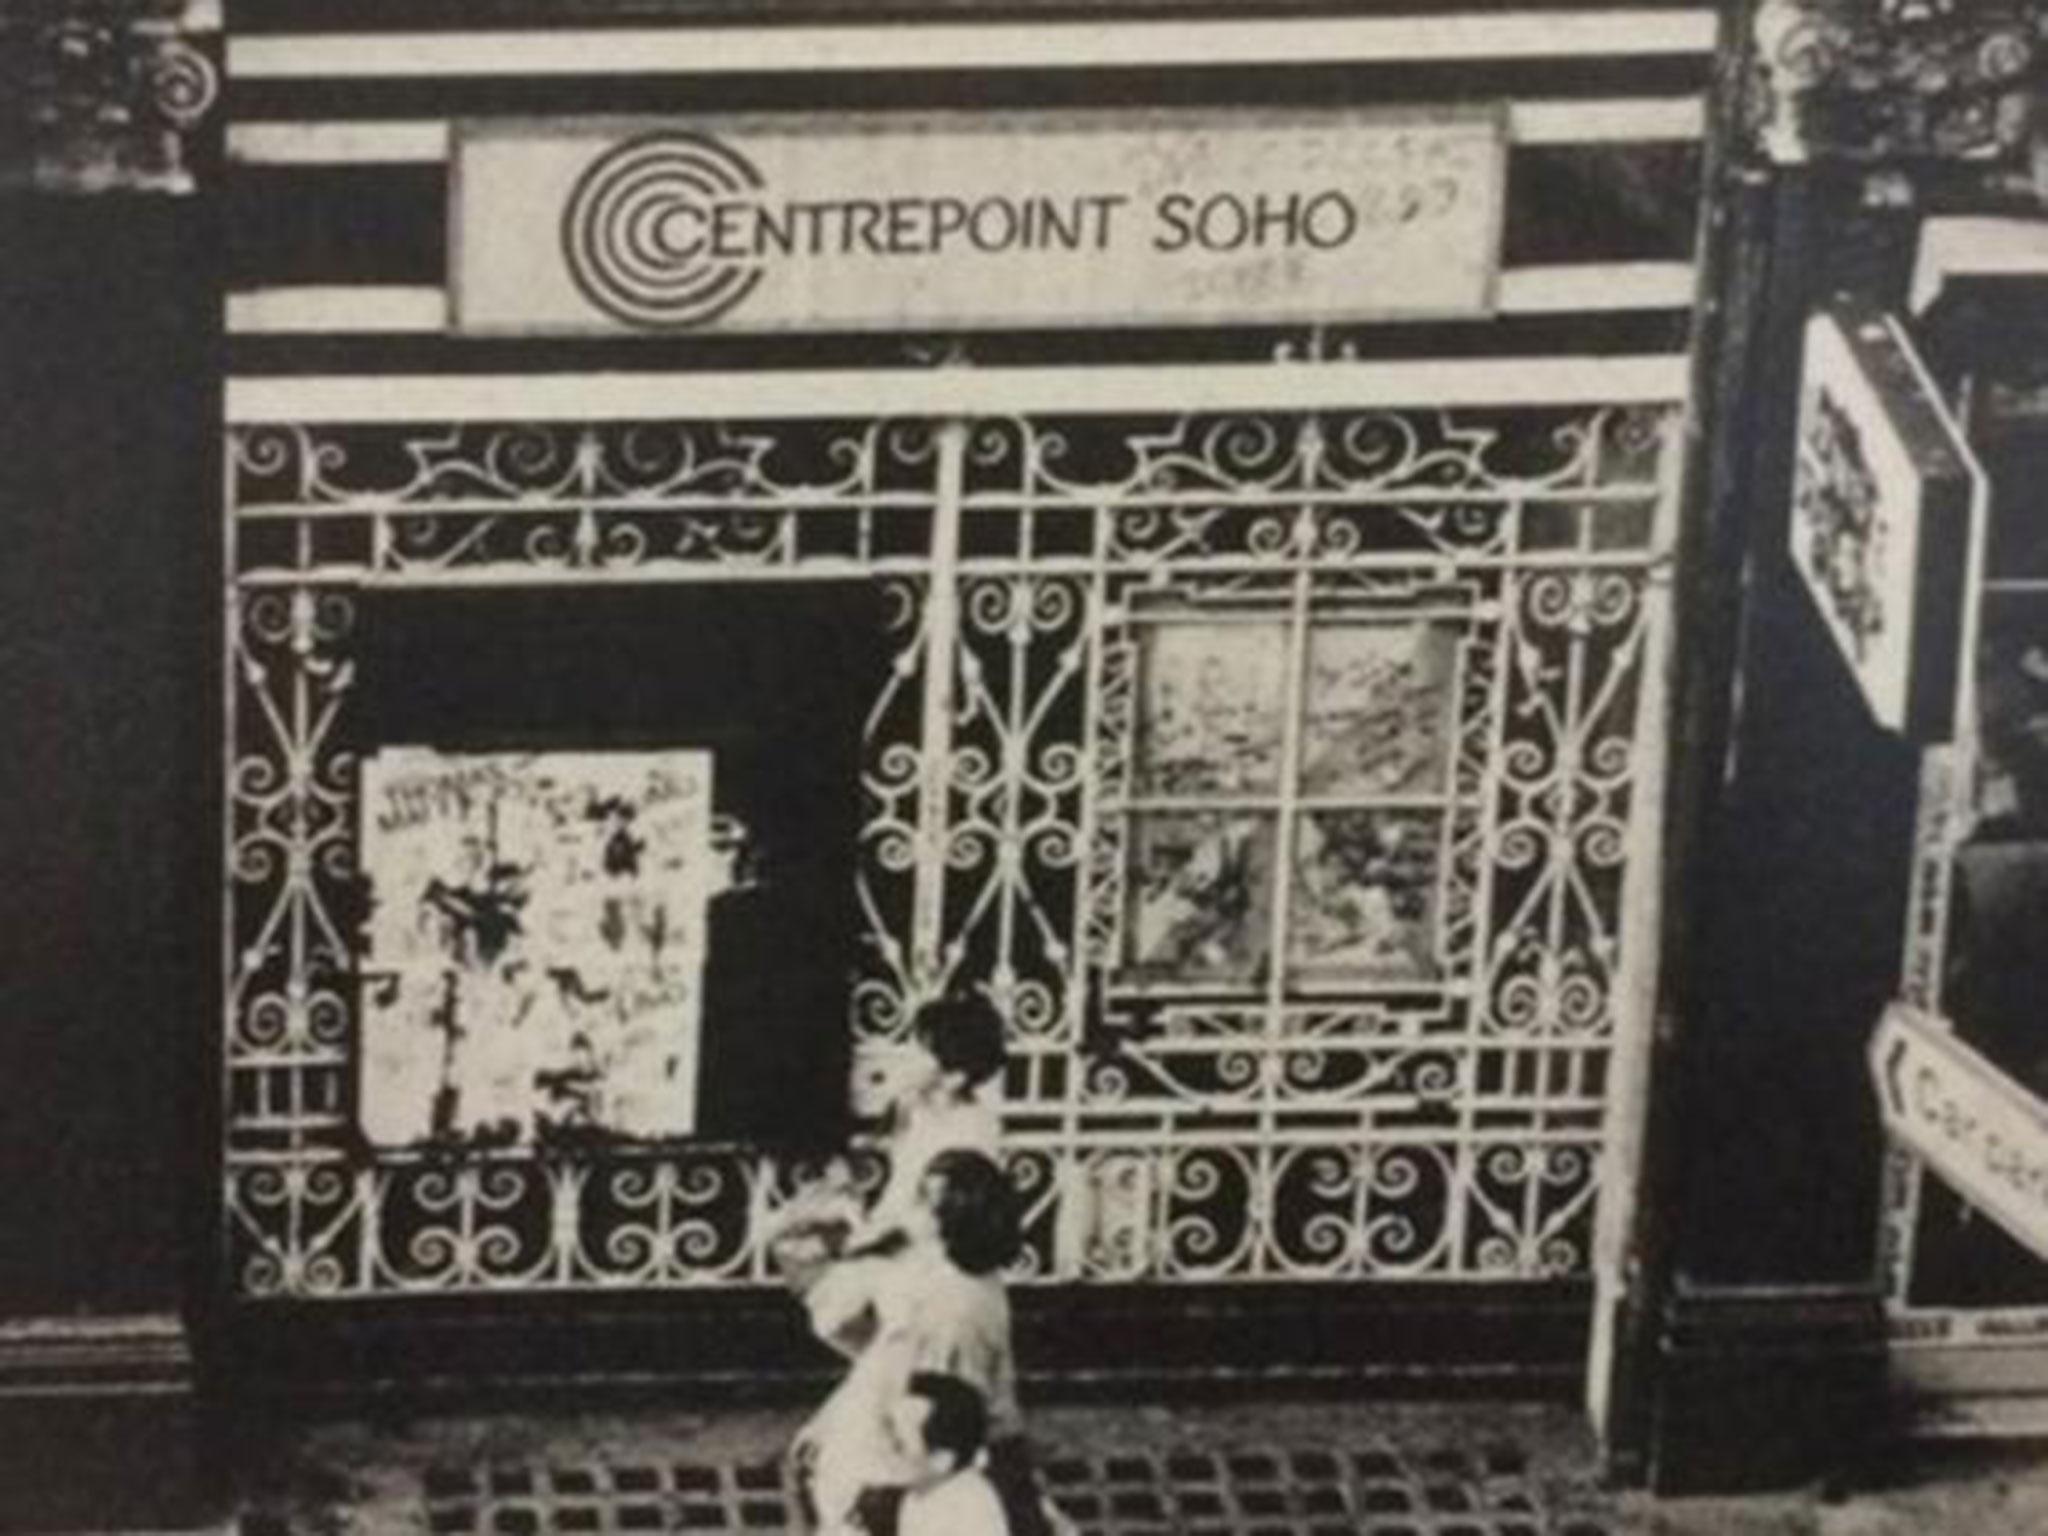 The original Centrepoint hostel, set up at St Ann's Church in Soho in 1969